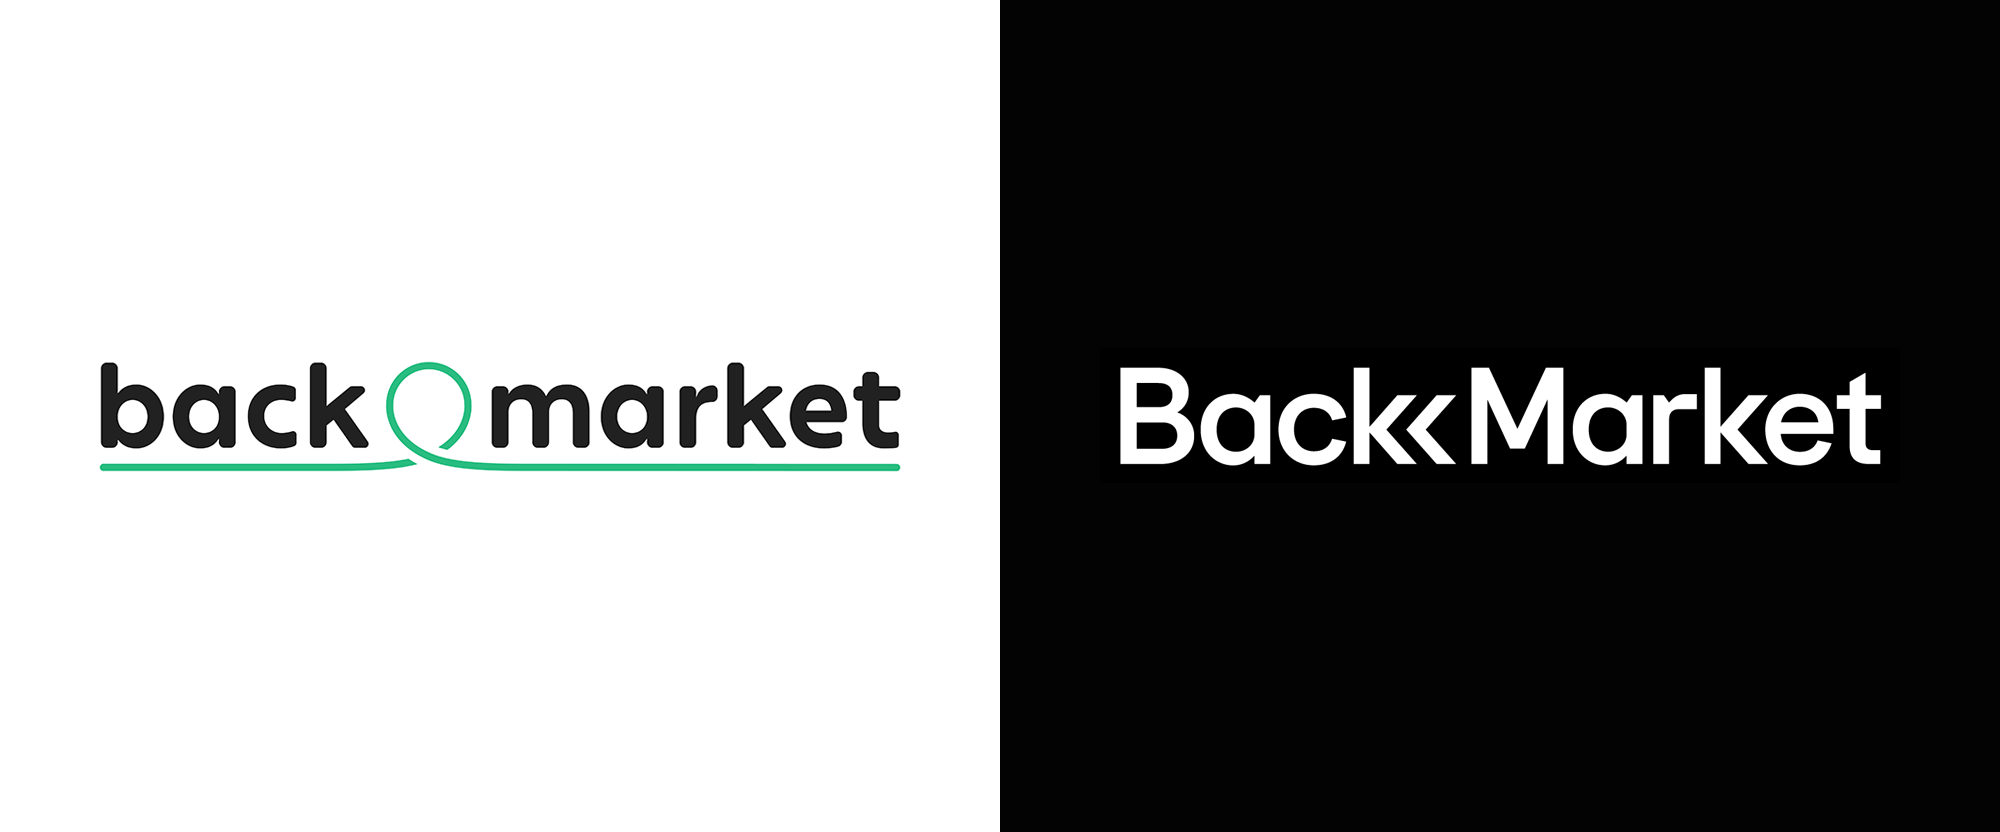 New Logo and Identity for Back Market by Koto